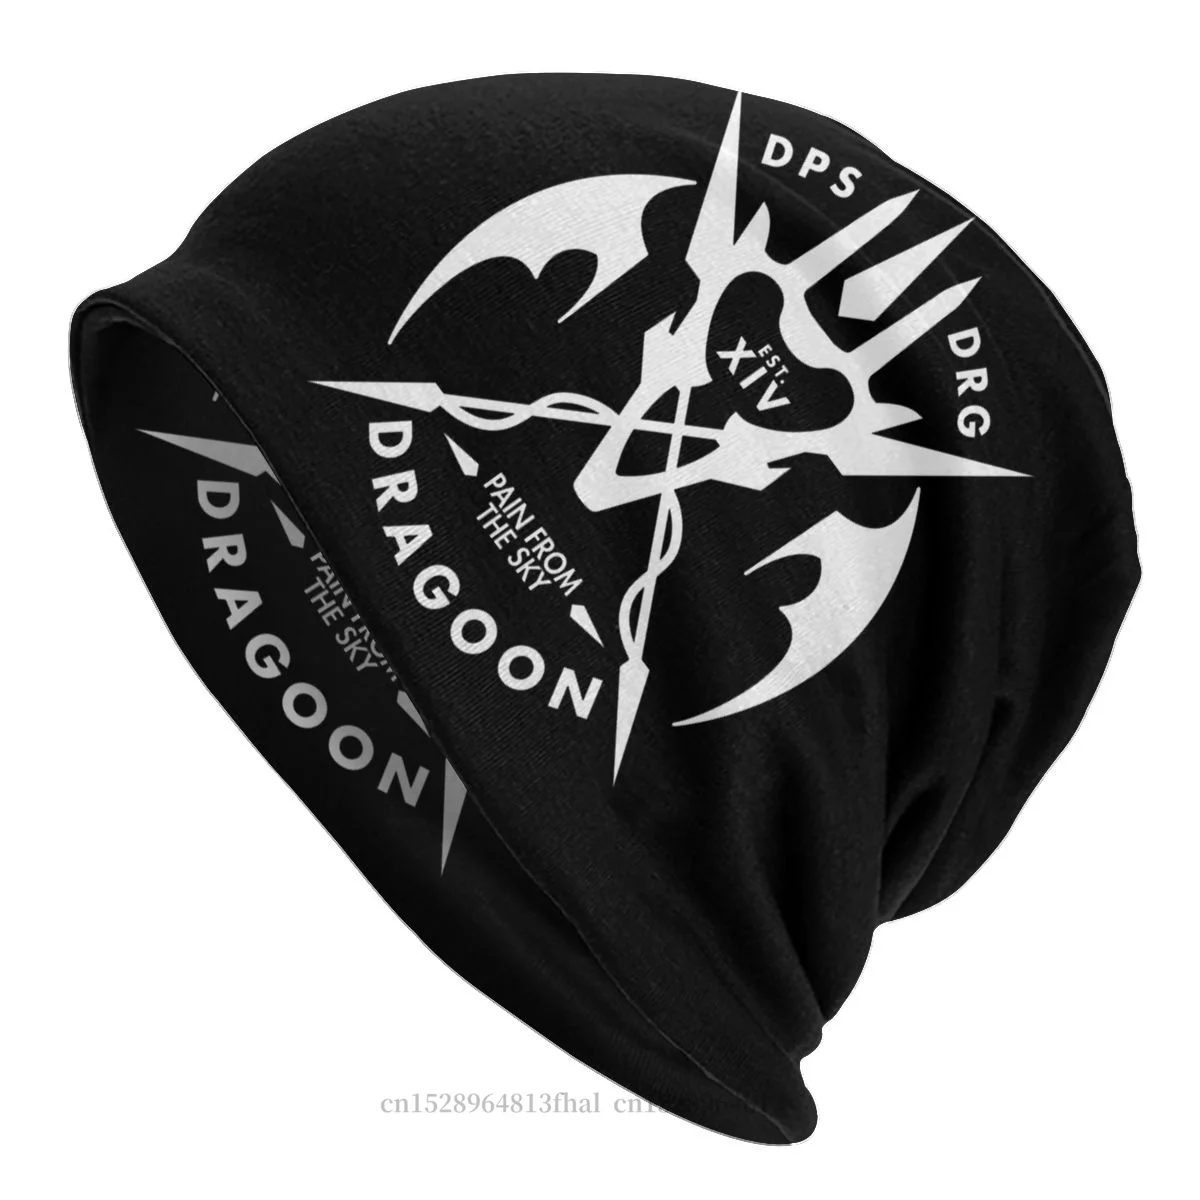 

Outdoor Hats Final Fantasy Role Playing Game Dragoon Bonnet Hipster Skullies Beanies Caps